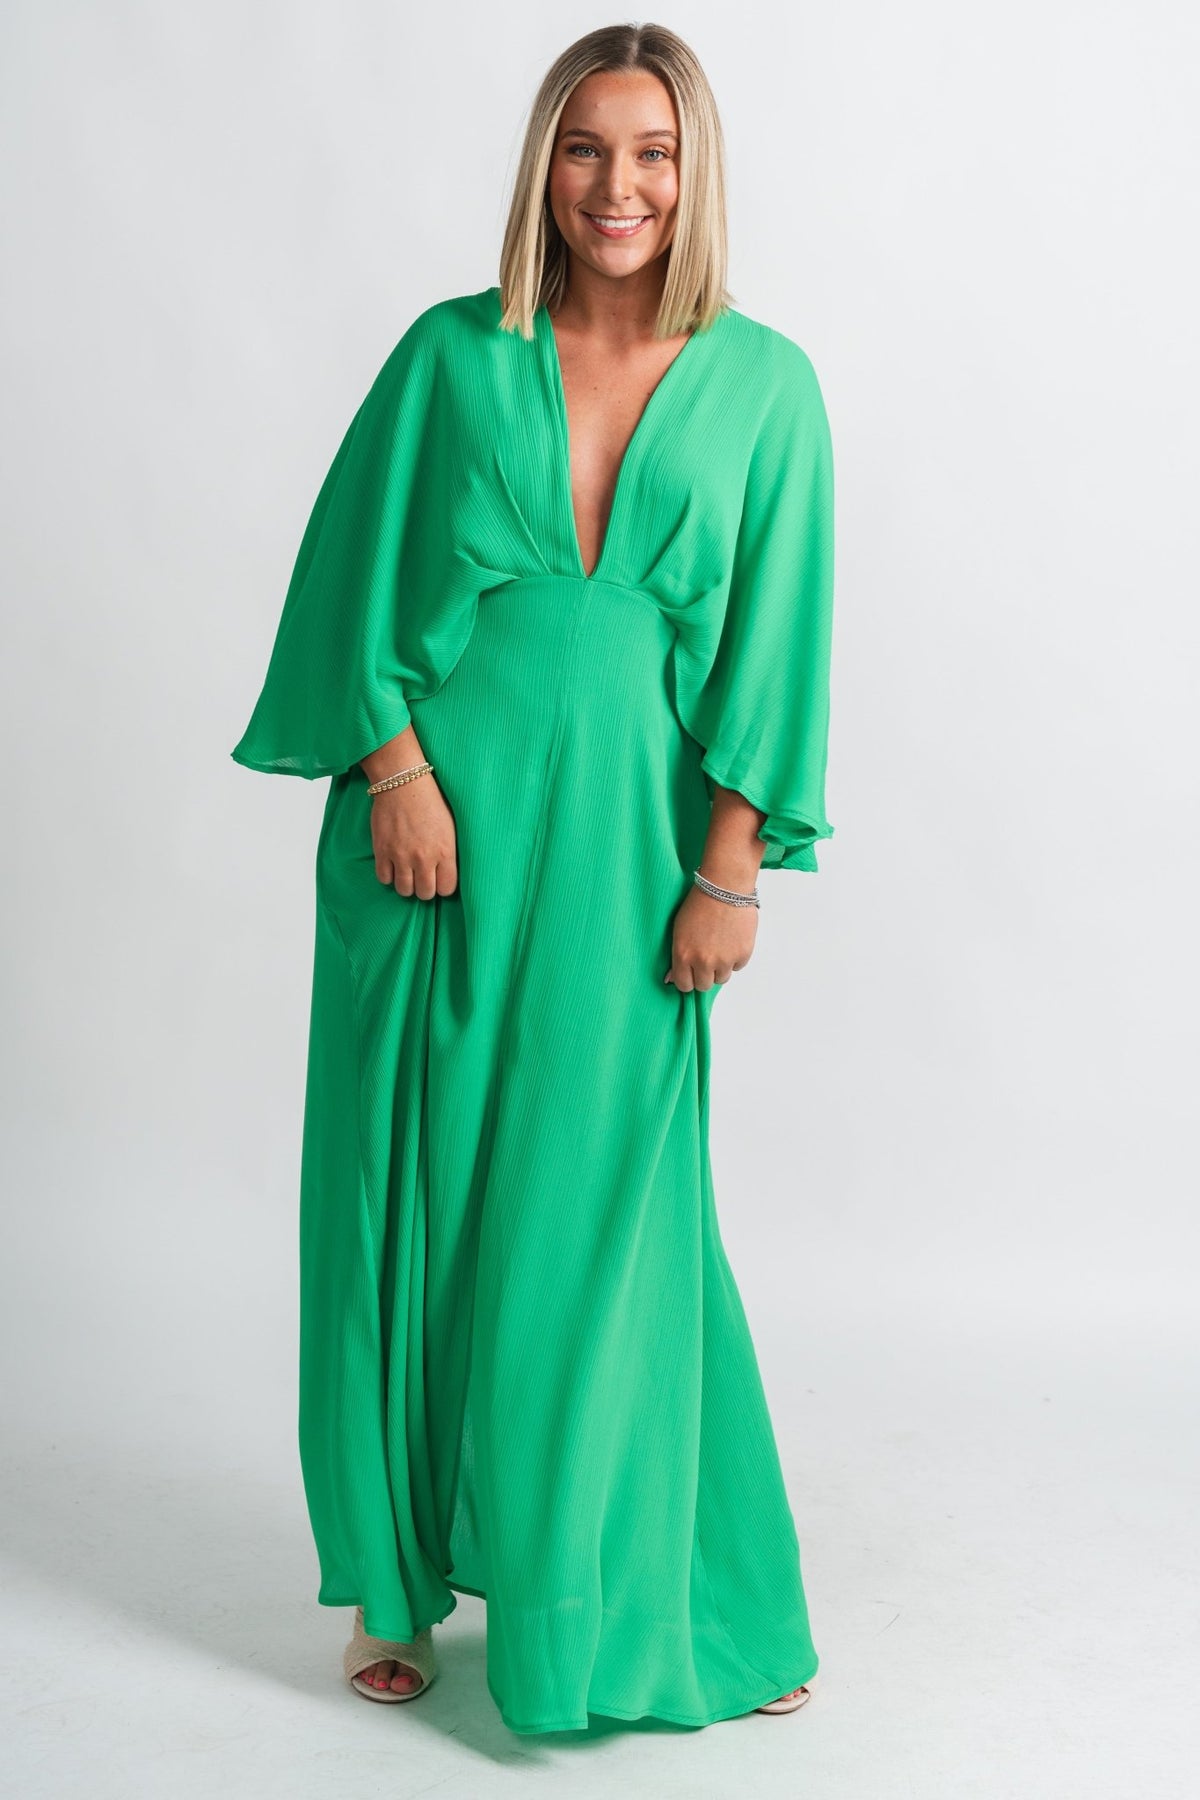 Crinkle cape maxi dress emerald - Trendy dress - Cute Vacation Collection at Lush Fashion Lounge Boutique in Oklahoma City